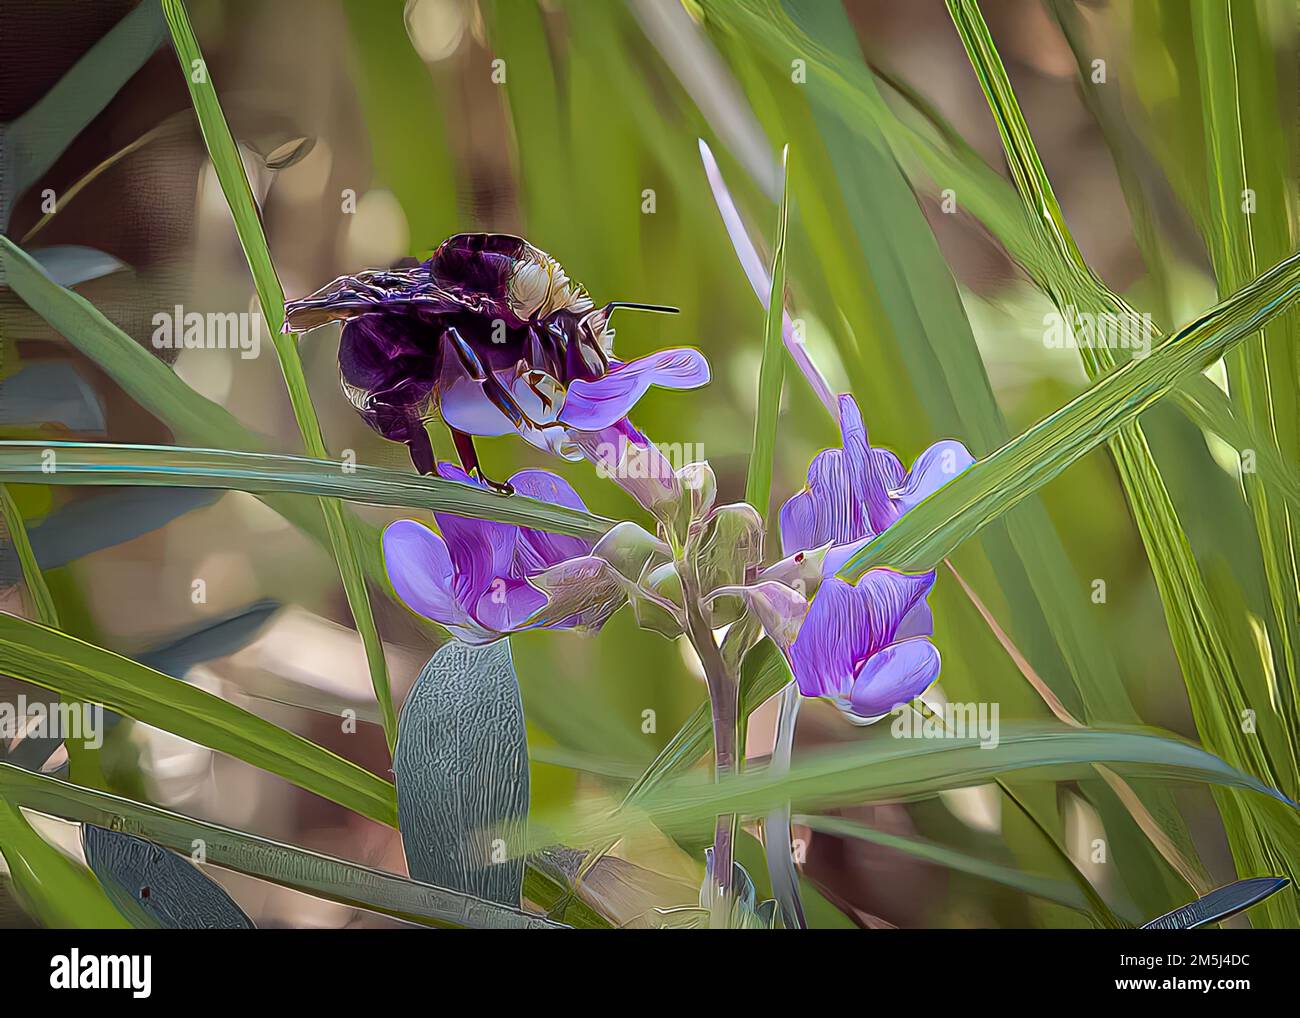 A closeup shot of a bumblebee on a purple petal Marsh Pea blossom flower in the grass Stock Photo